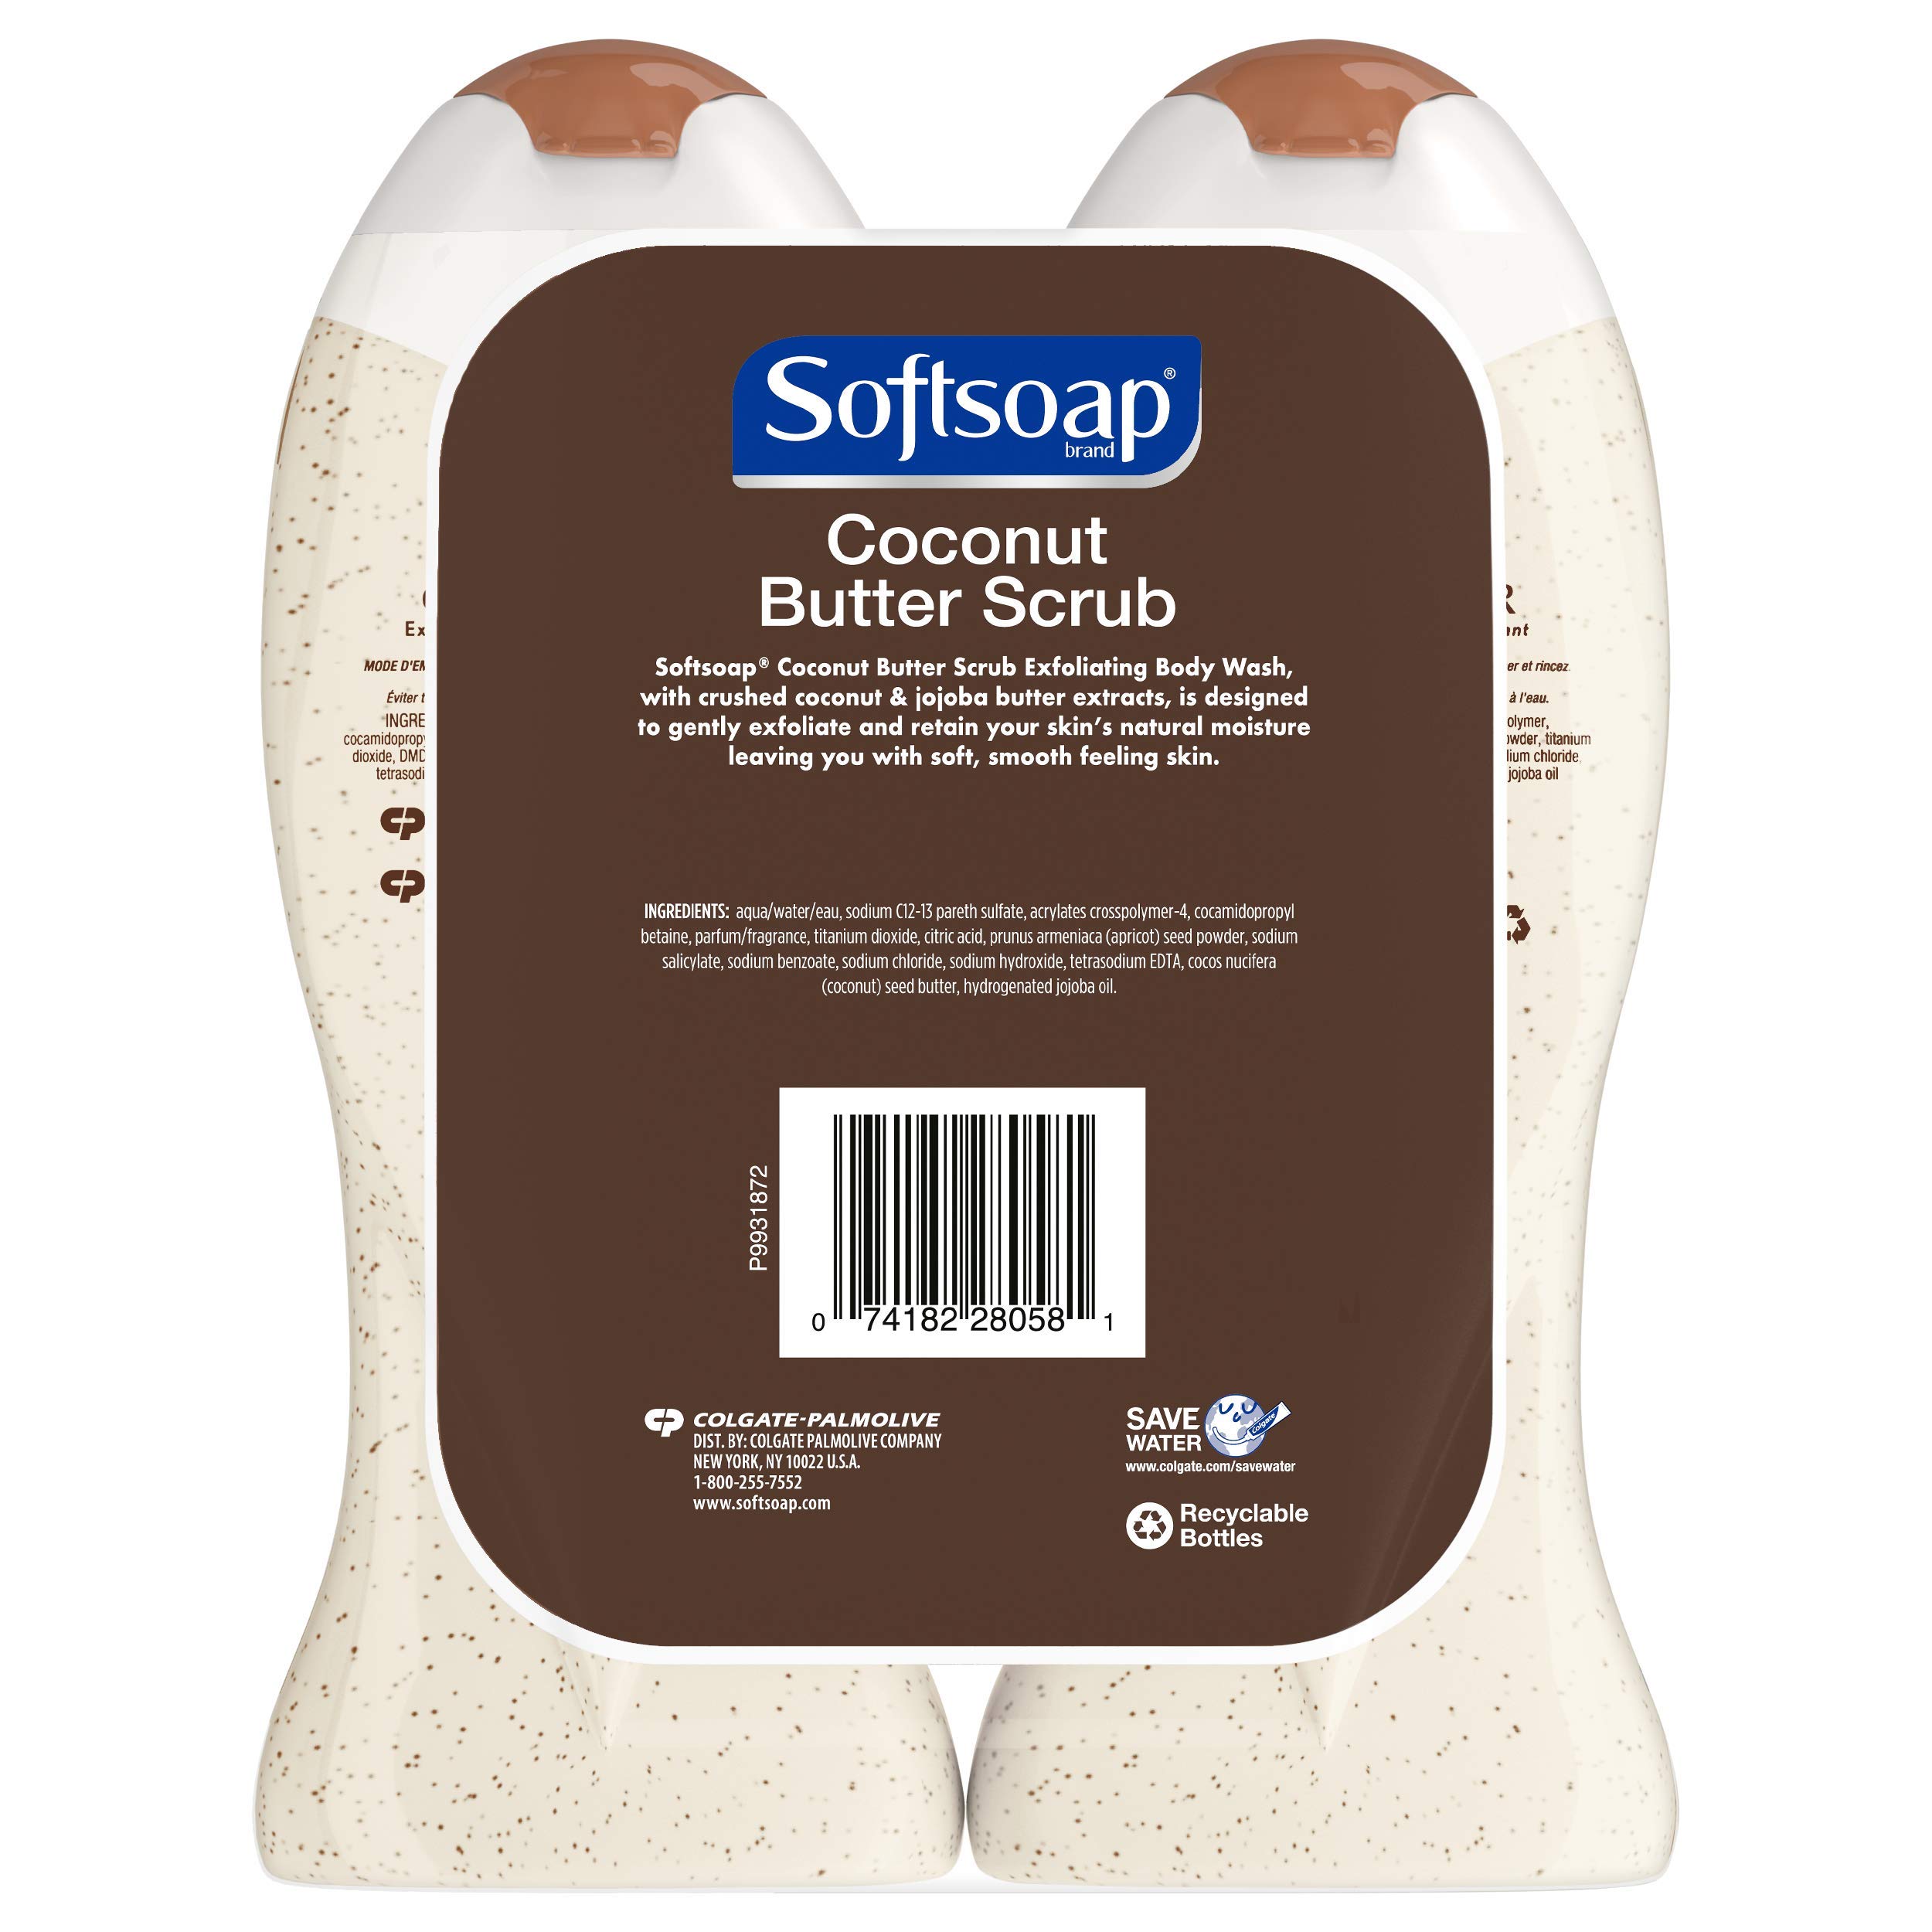 Softsoap Body Butter Coconut Scrub, Body Buff Wash, 15 Ounce (Pack of 2)